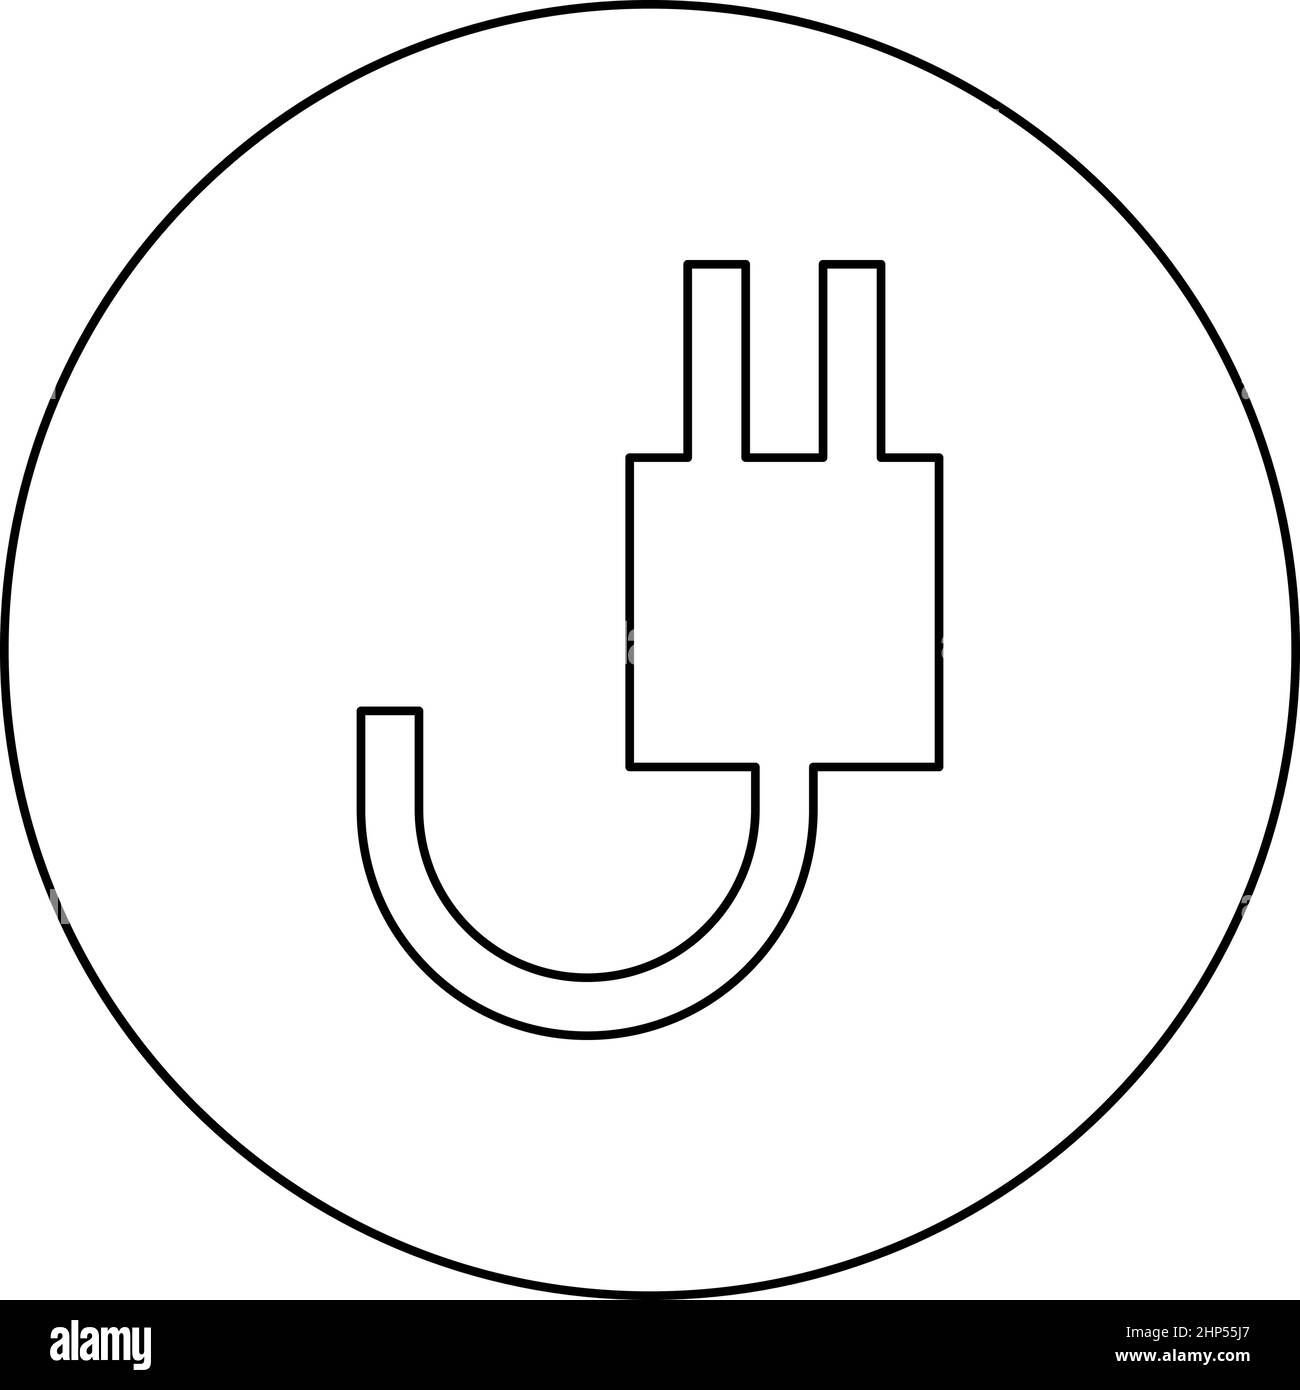 Electricfork with wire icon in circle round black color vector illustration solid outline style image Stock Vector